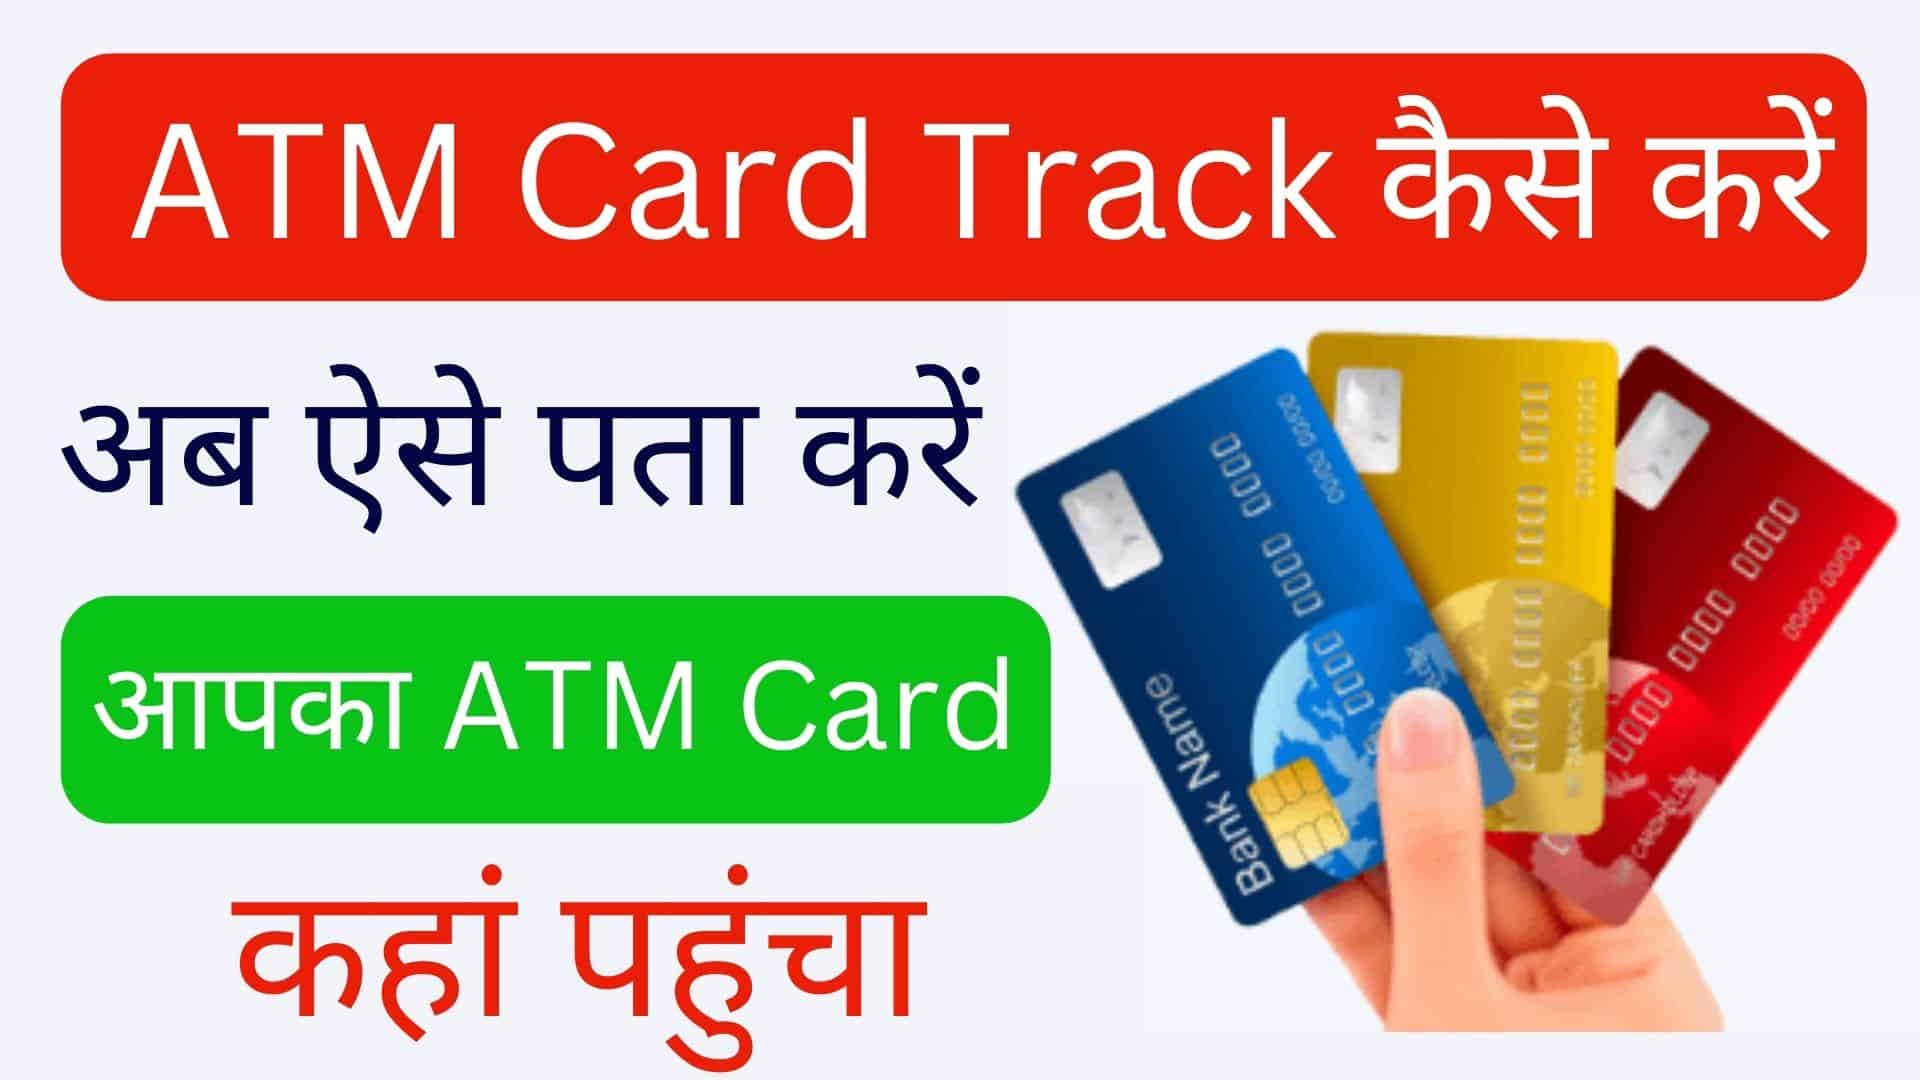 atm card track kaise kare , atm card track status , atm card tracking by account number , how to track atm card location , एटीएम कार्ड चेक , sbi atm card track , track sbi card dispatch details , boi atm card track status